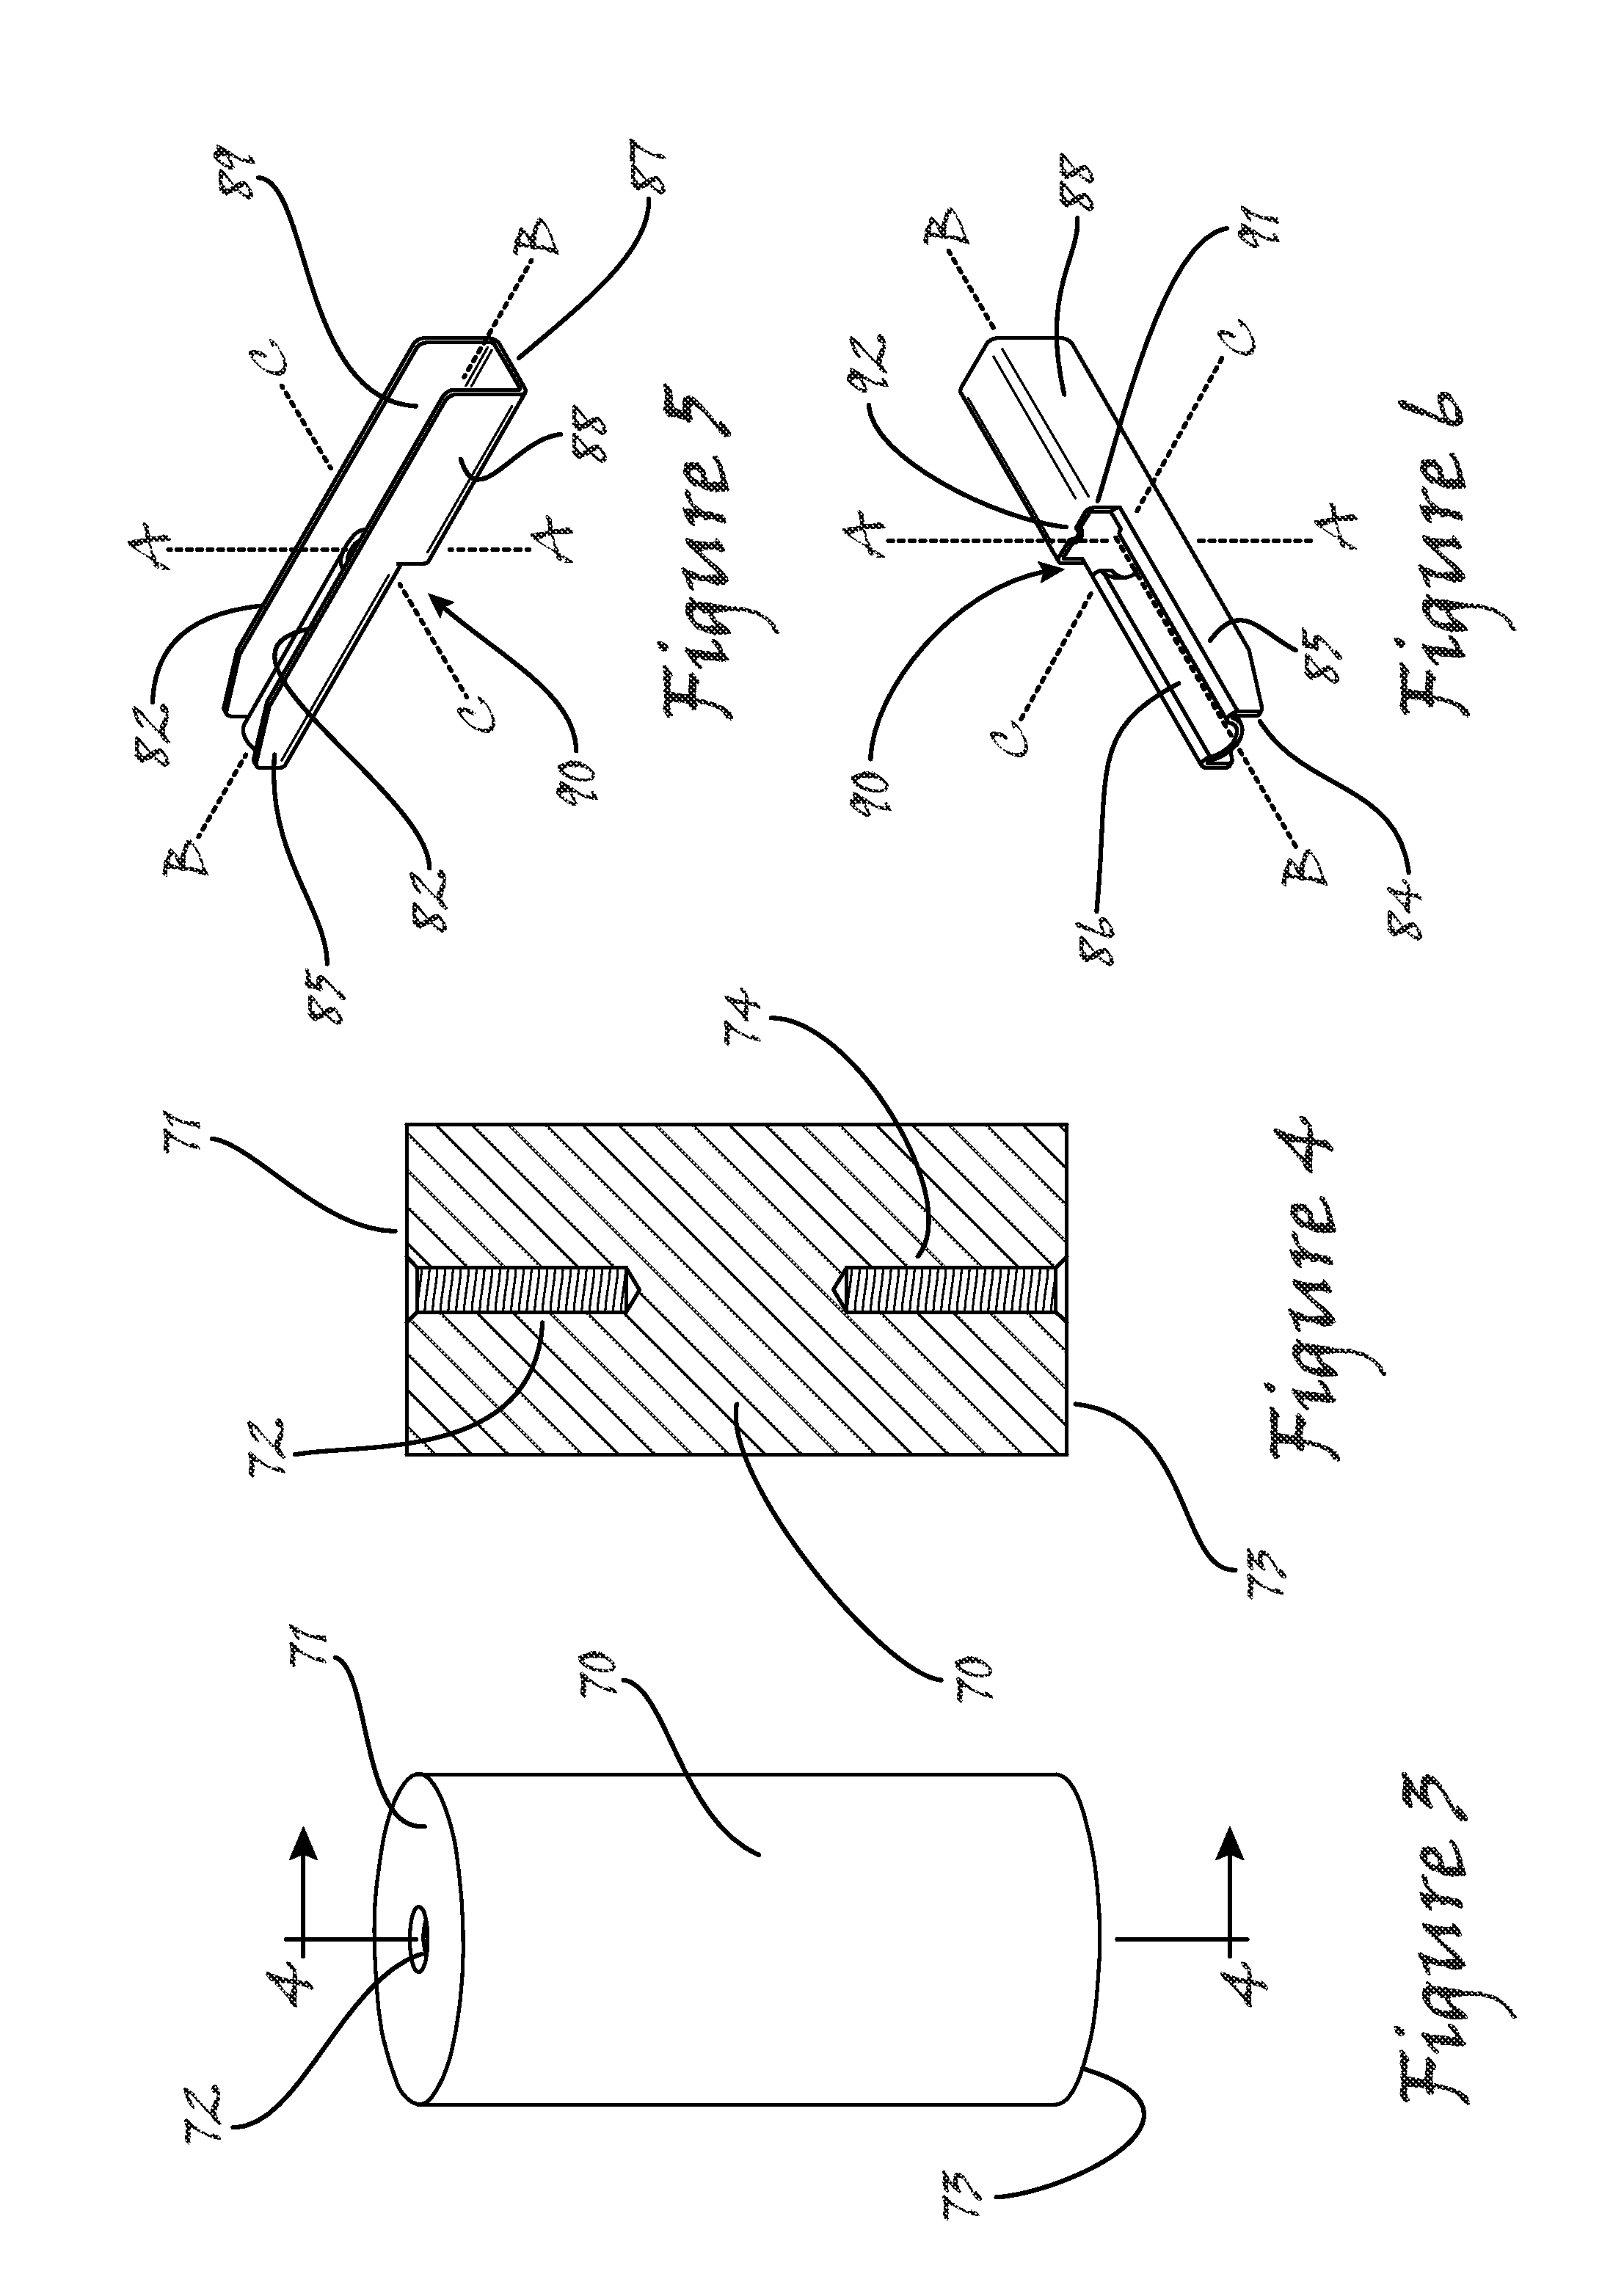 Photovoltaic panel racking assembly for use in connection with roof installation of panels